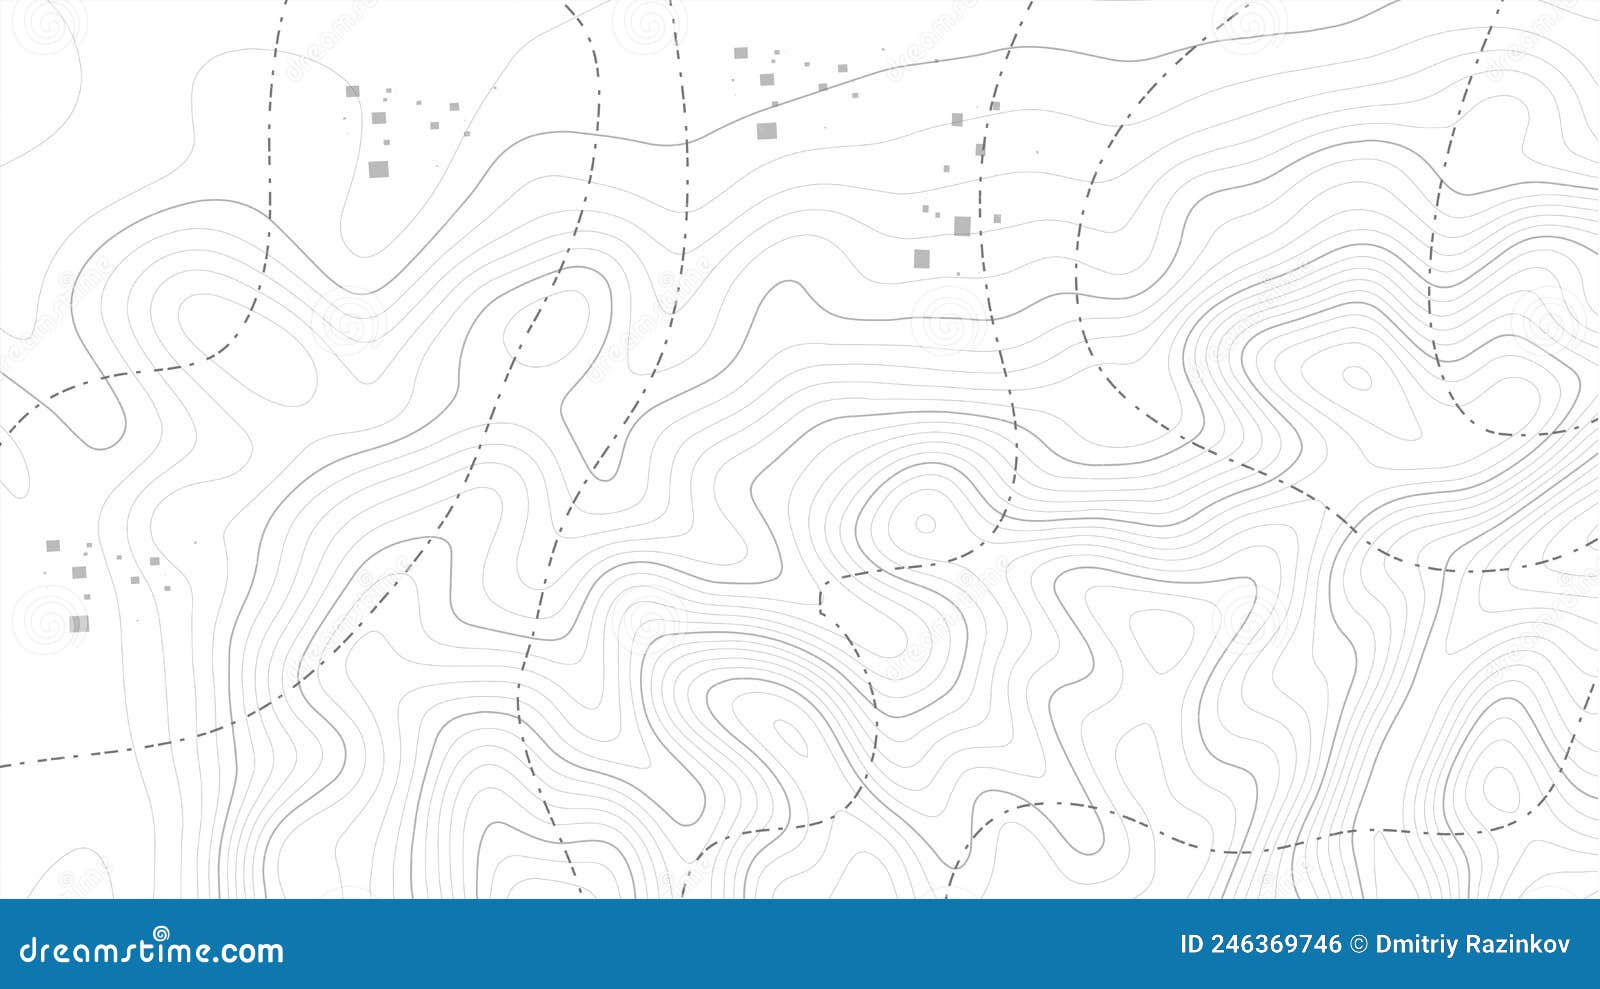 abstract paper cut s. topographic map on white background. topo map elevation lines. contour  abstract 